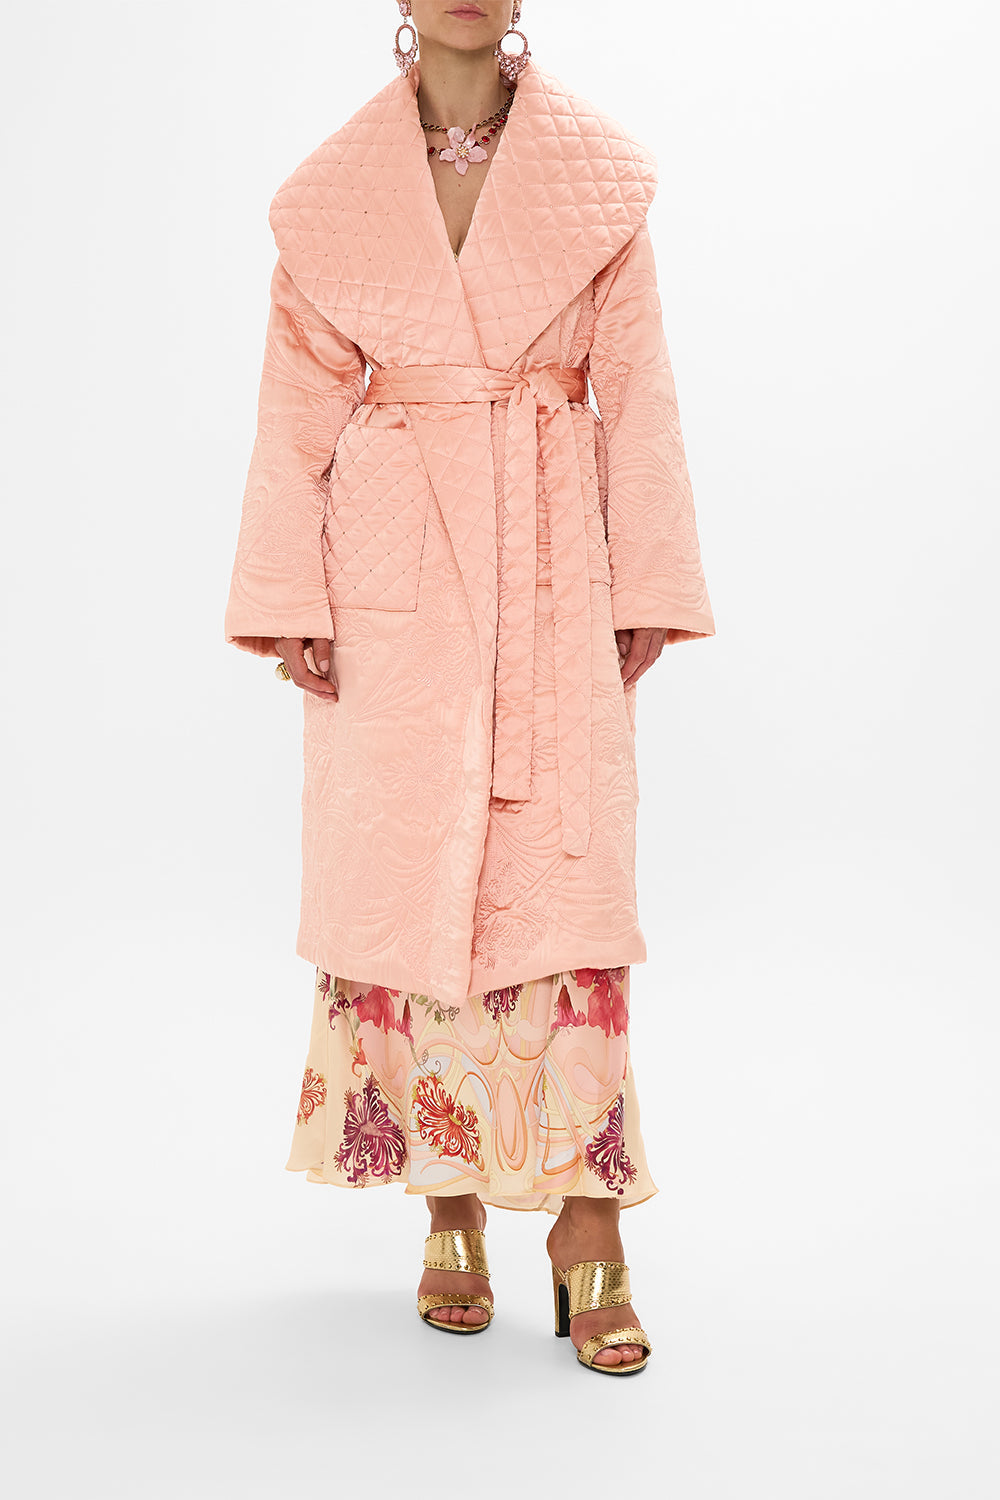 CAMILLA Floral Quilted Long Wrap Coat in Blossoms and Brushstrokes